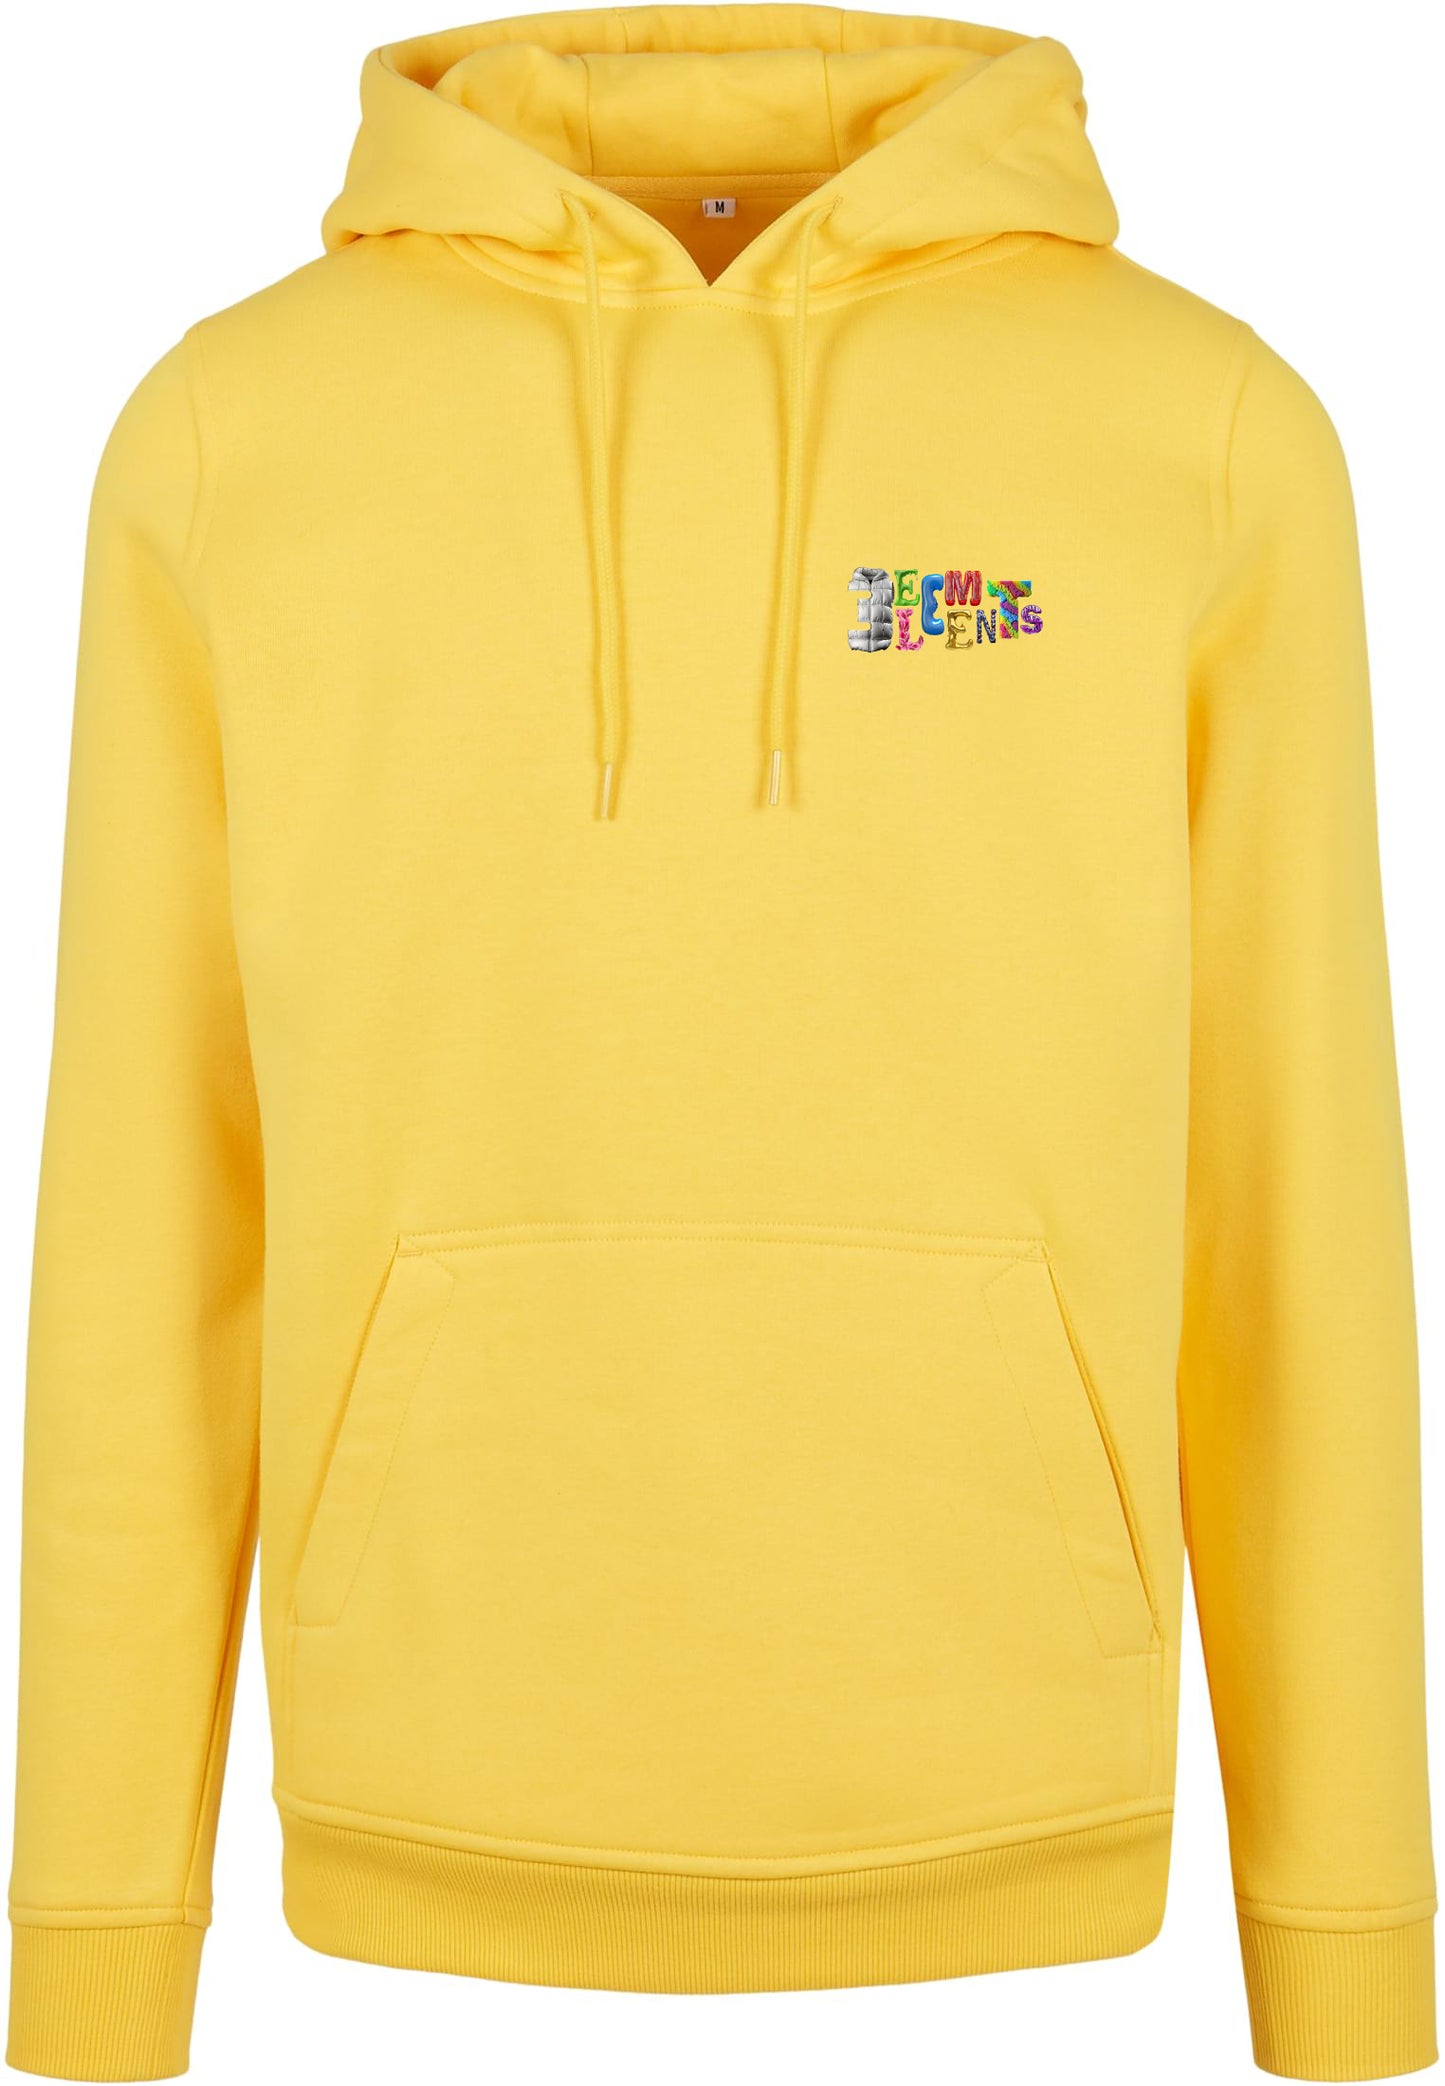 3E Element(s) Hoodie Taxi yellow